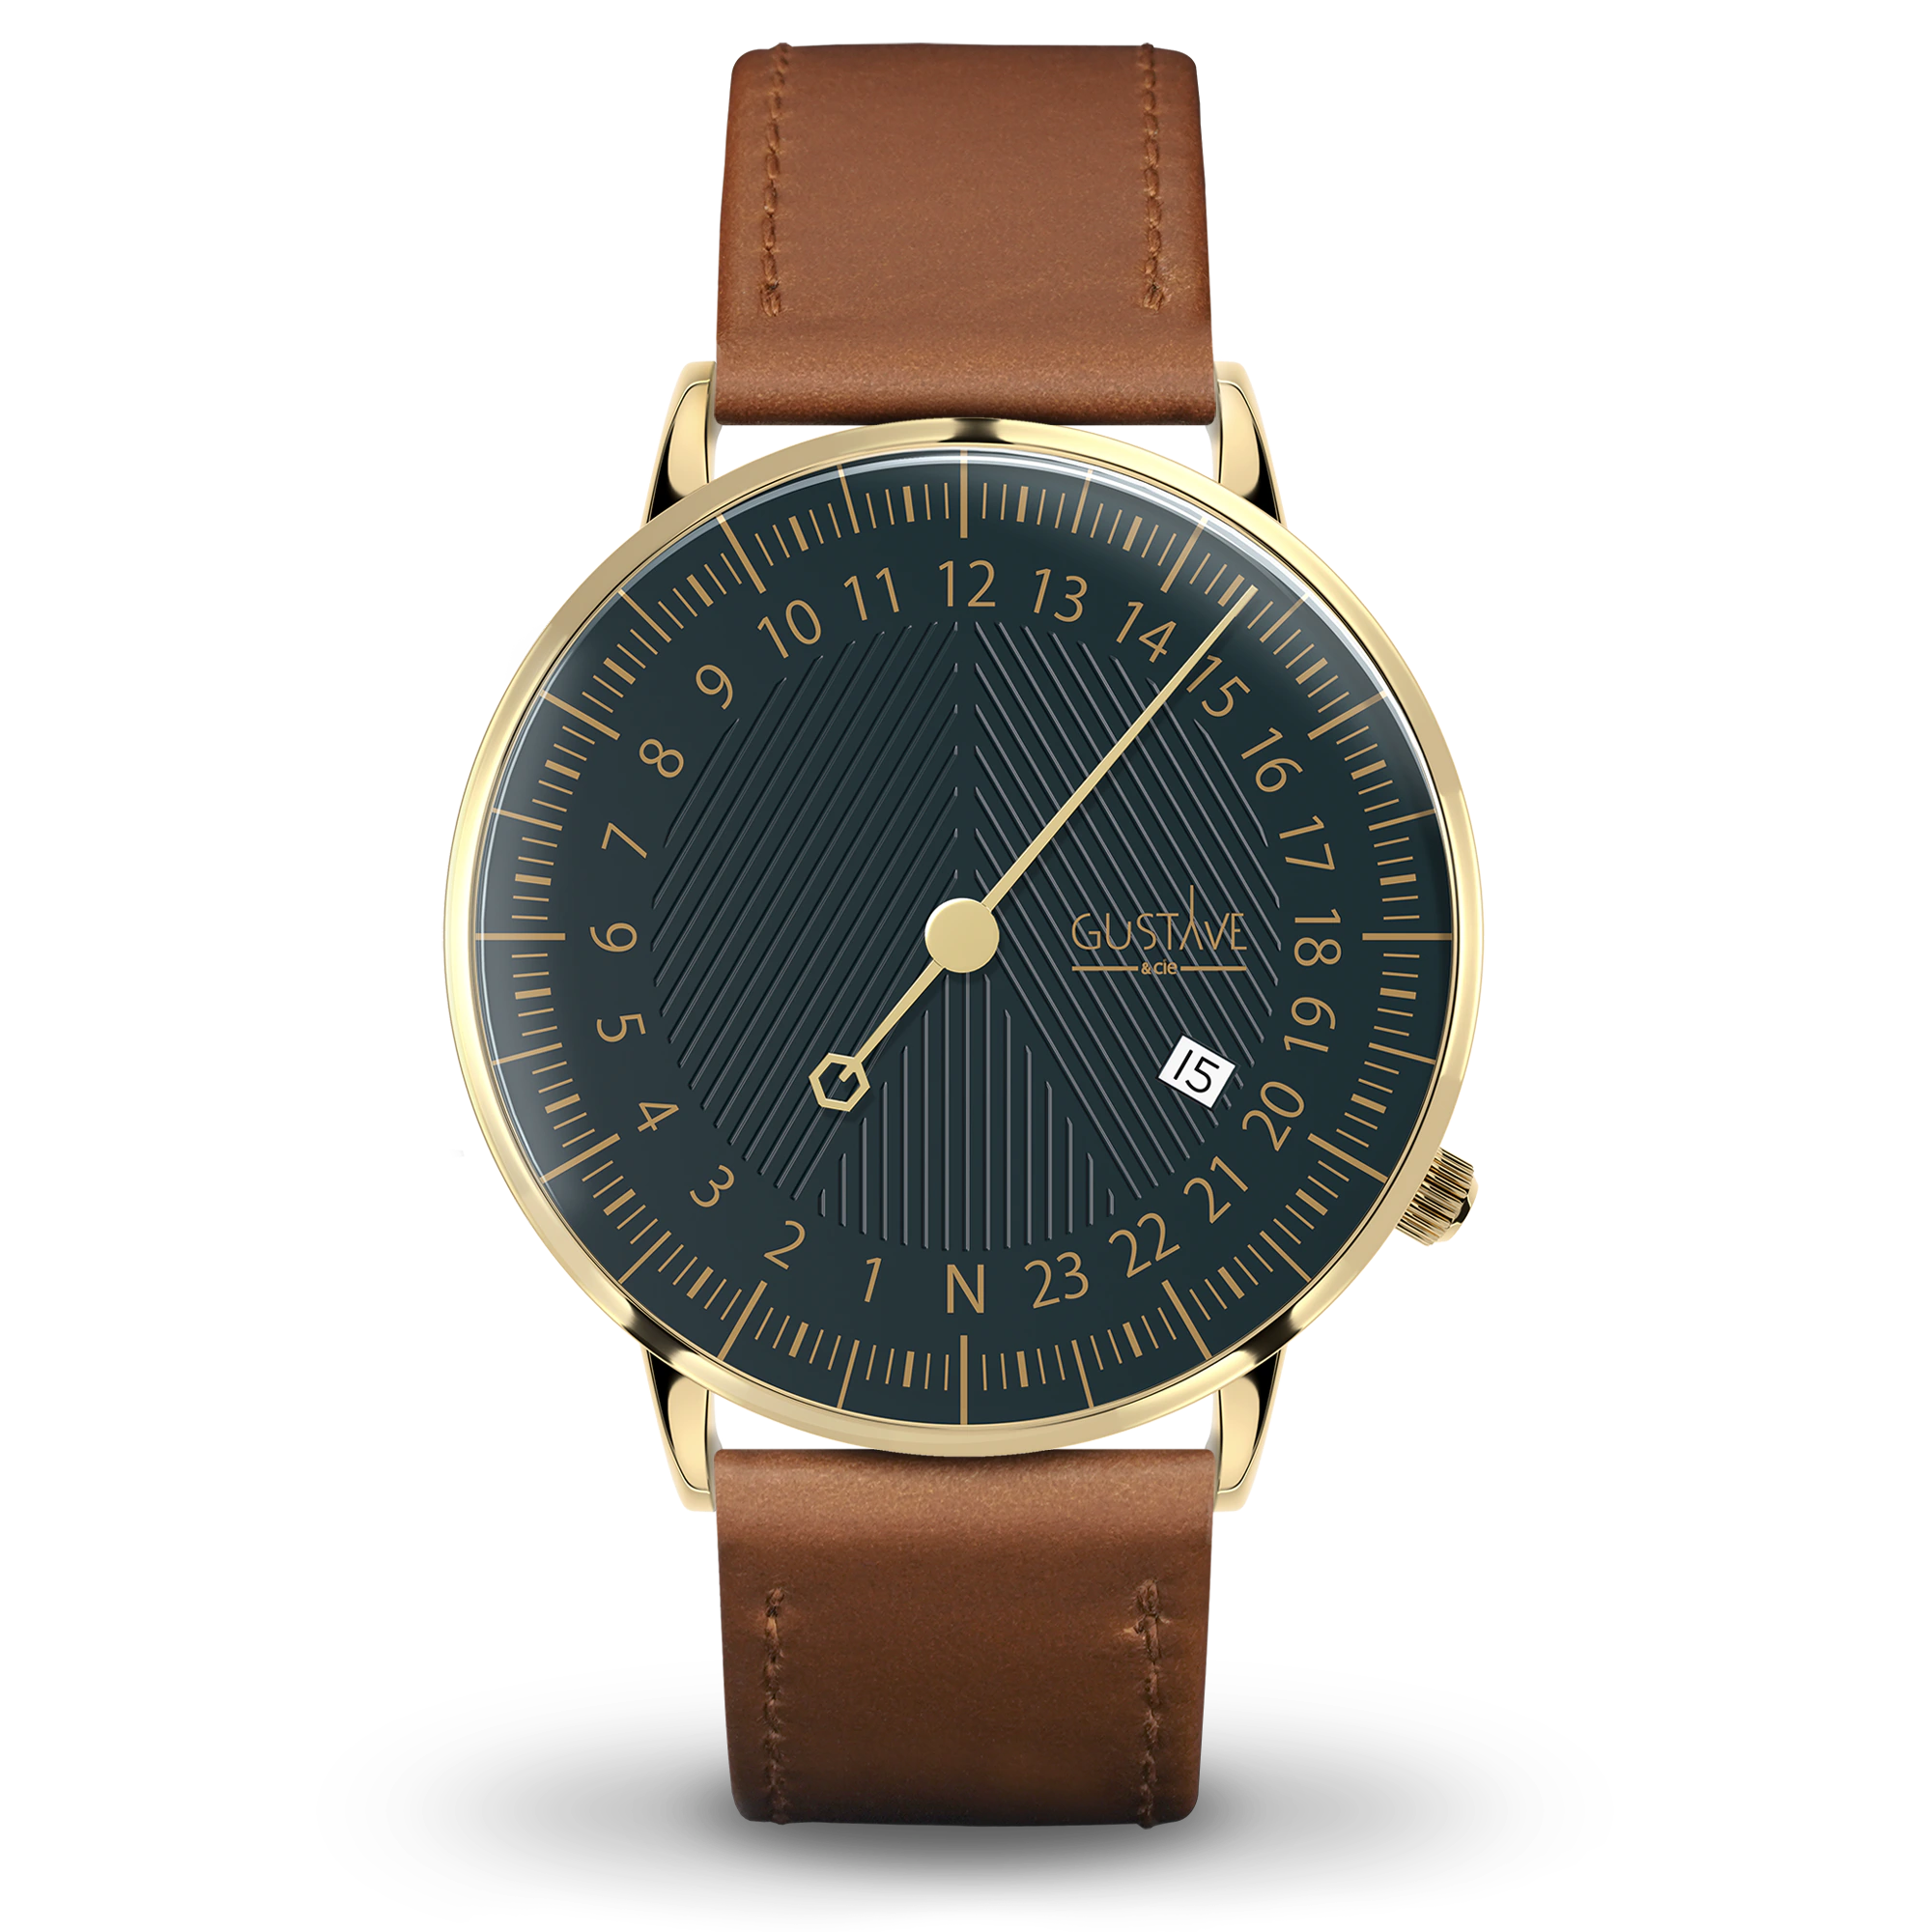 André 24H 40mm gold and green watch, brown leather strap with stitching